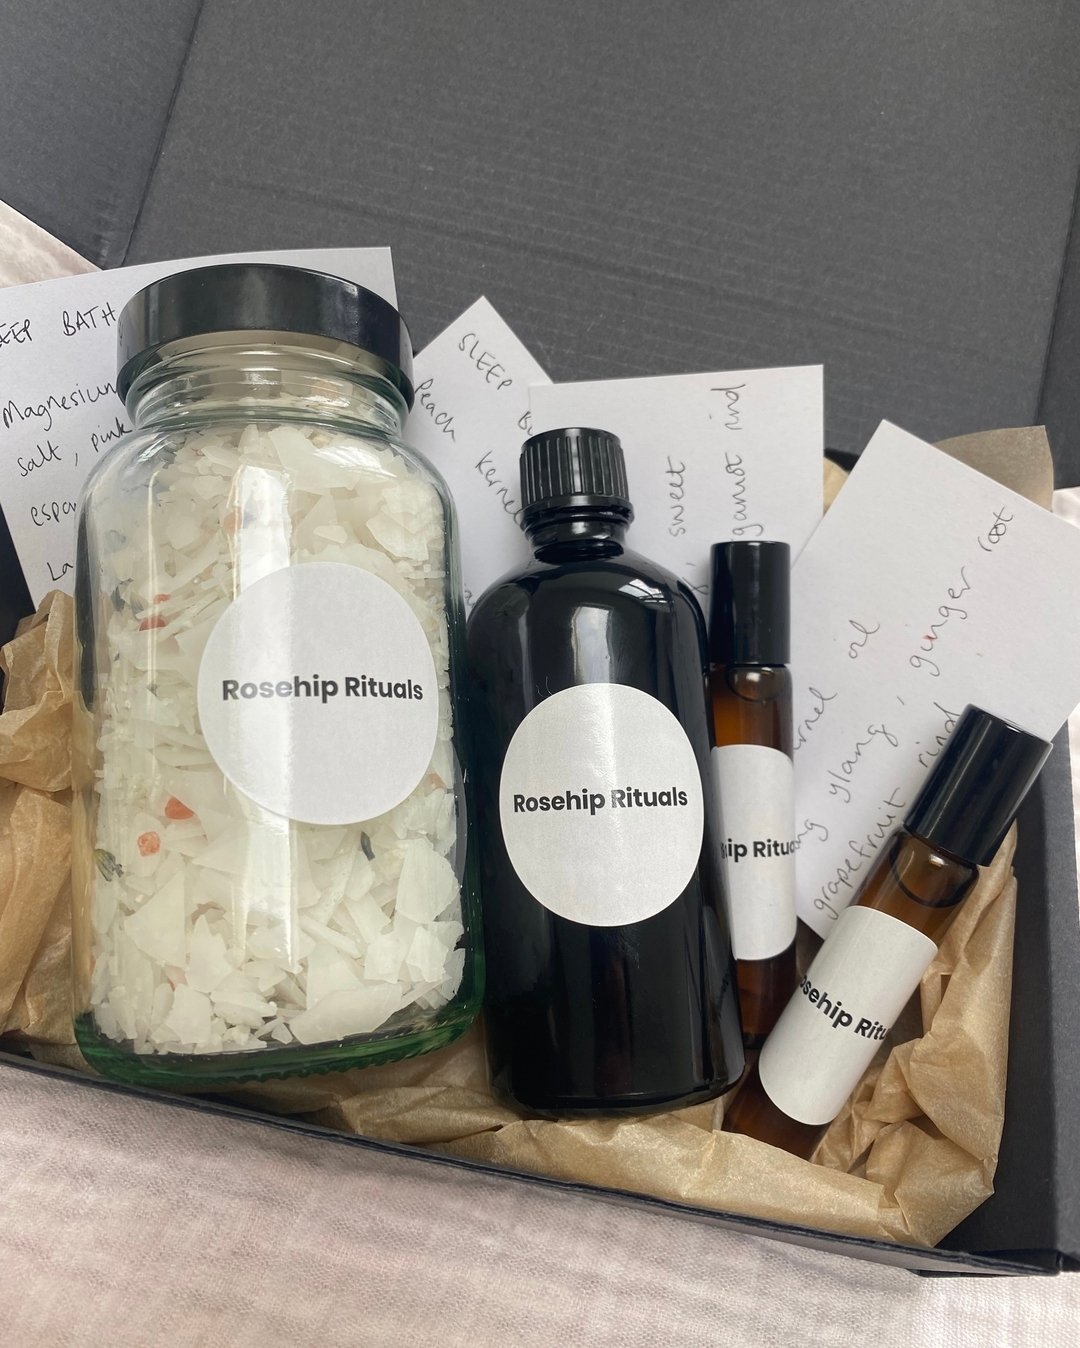 Some beautiful aromatics all packaged up and ready for delivery 

I love blending bespoke oils, so you can&hellip;
hit pause 
drift off 
feel revitalised 
find focus 
support overwhelm
whatever it is 

I can create an aromatherapy body oil, bath salt